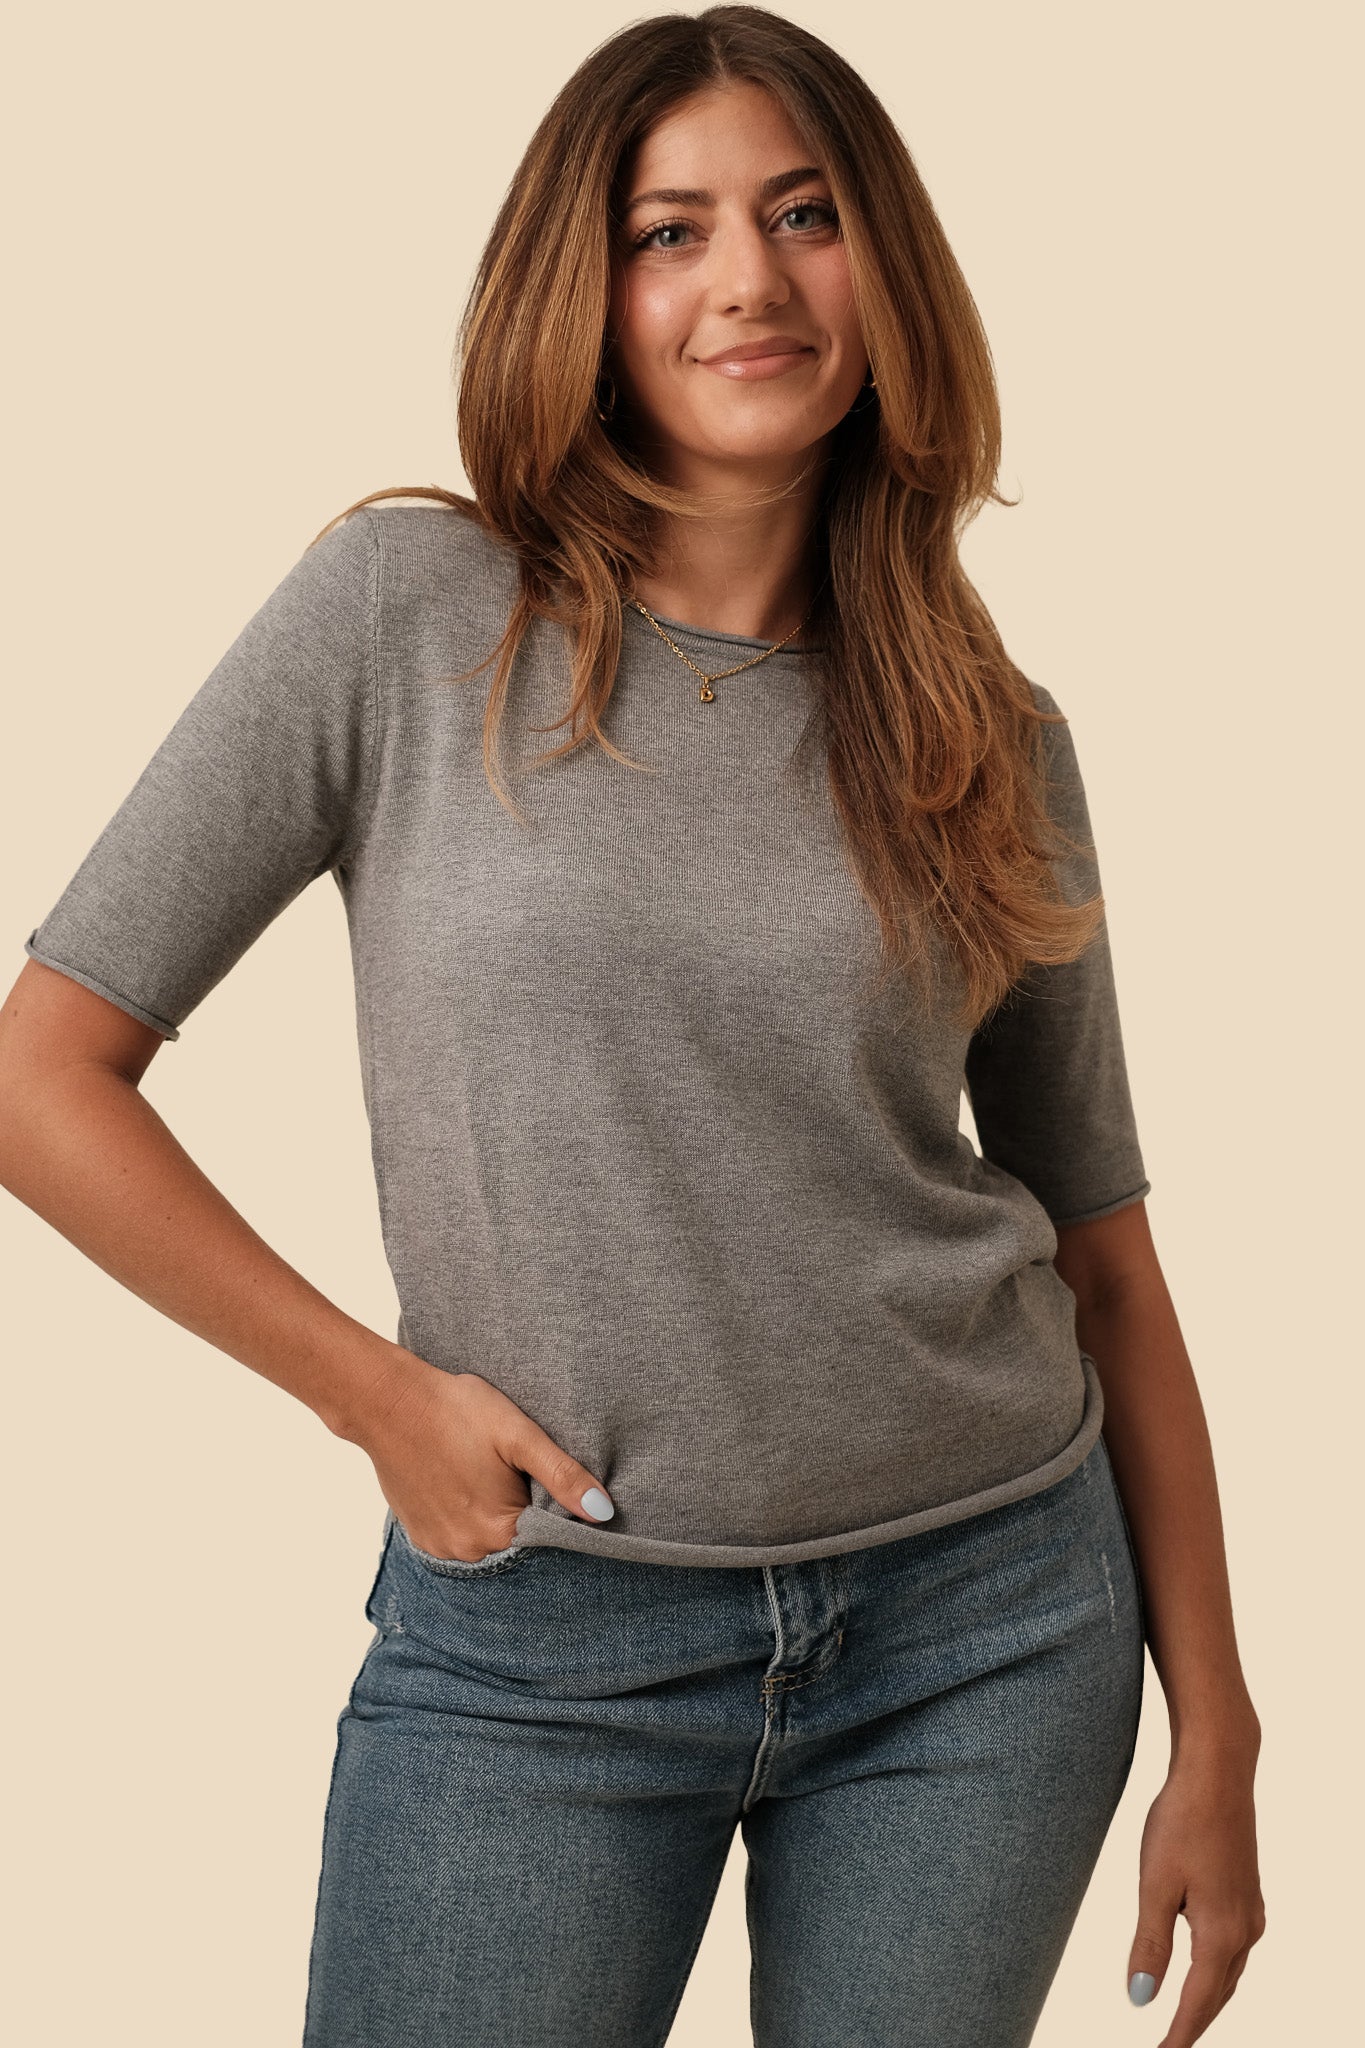 Things Between Nora Grey Pullover Knit Top